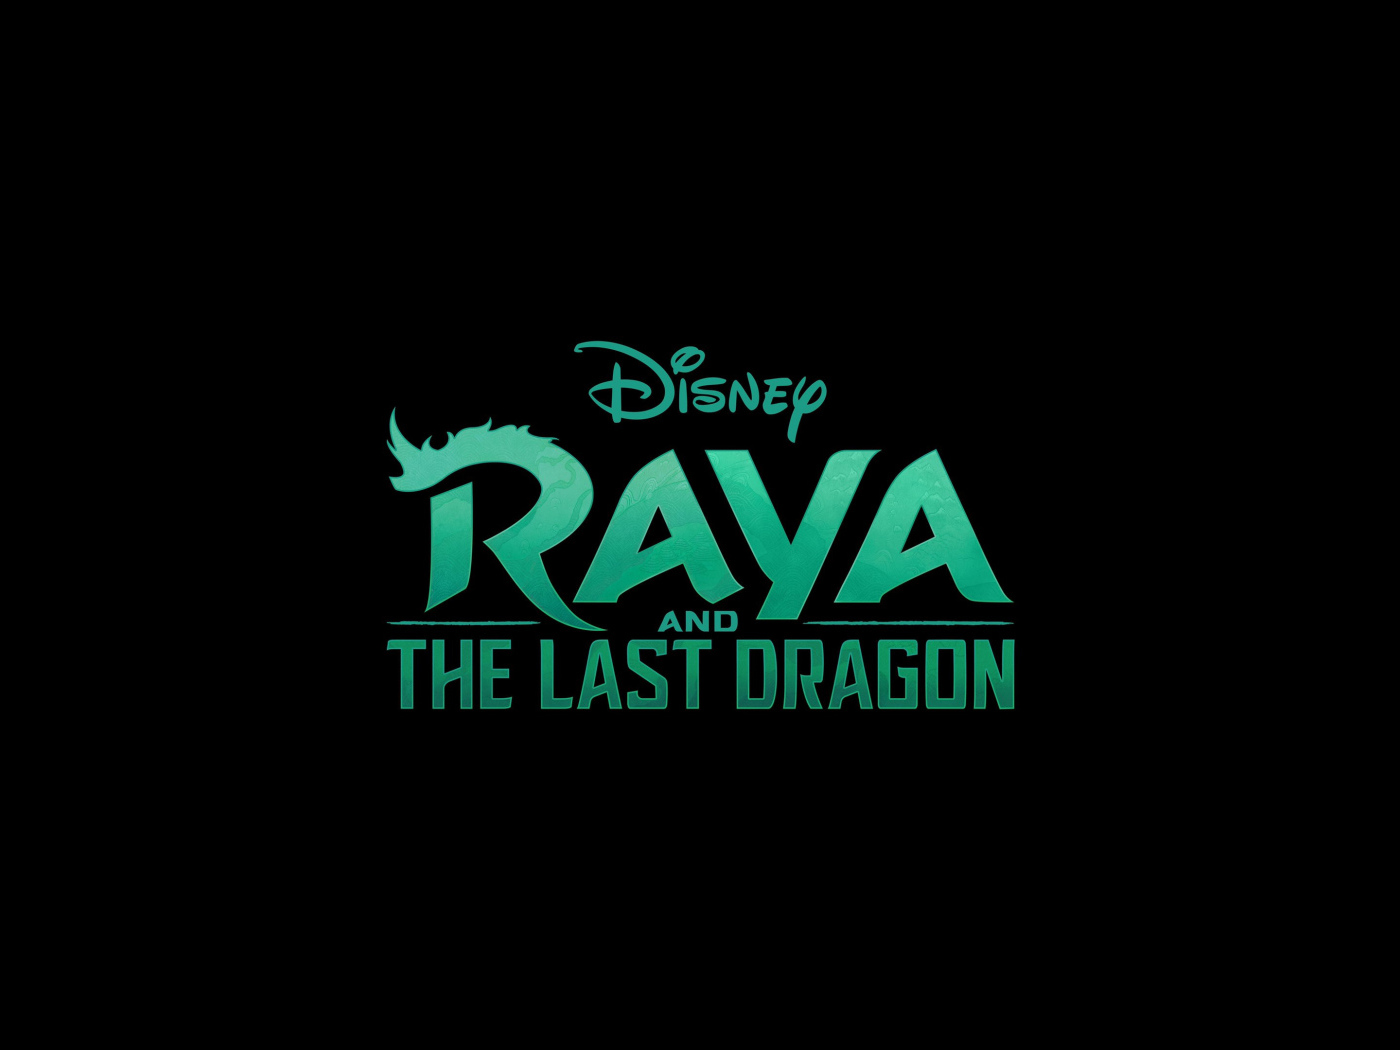 Poster for the new cartoon Reya and the last dragon, 2021